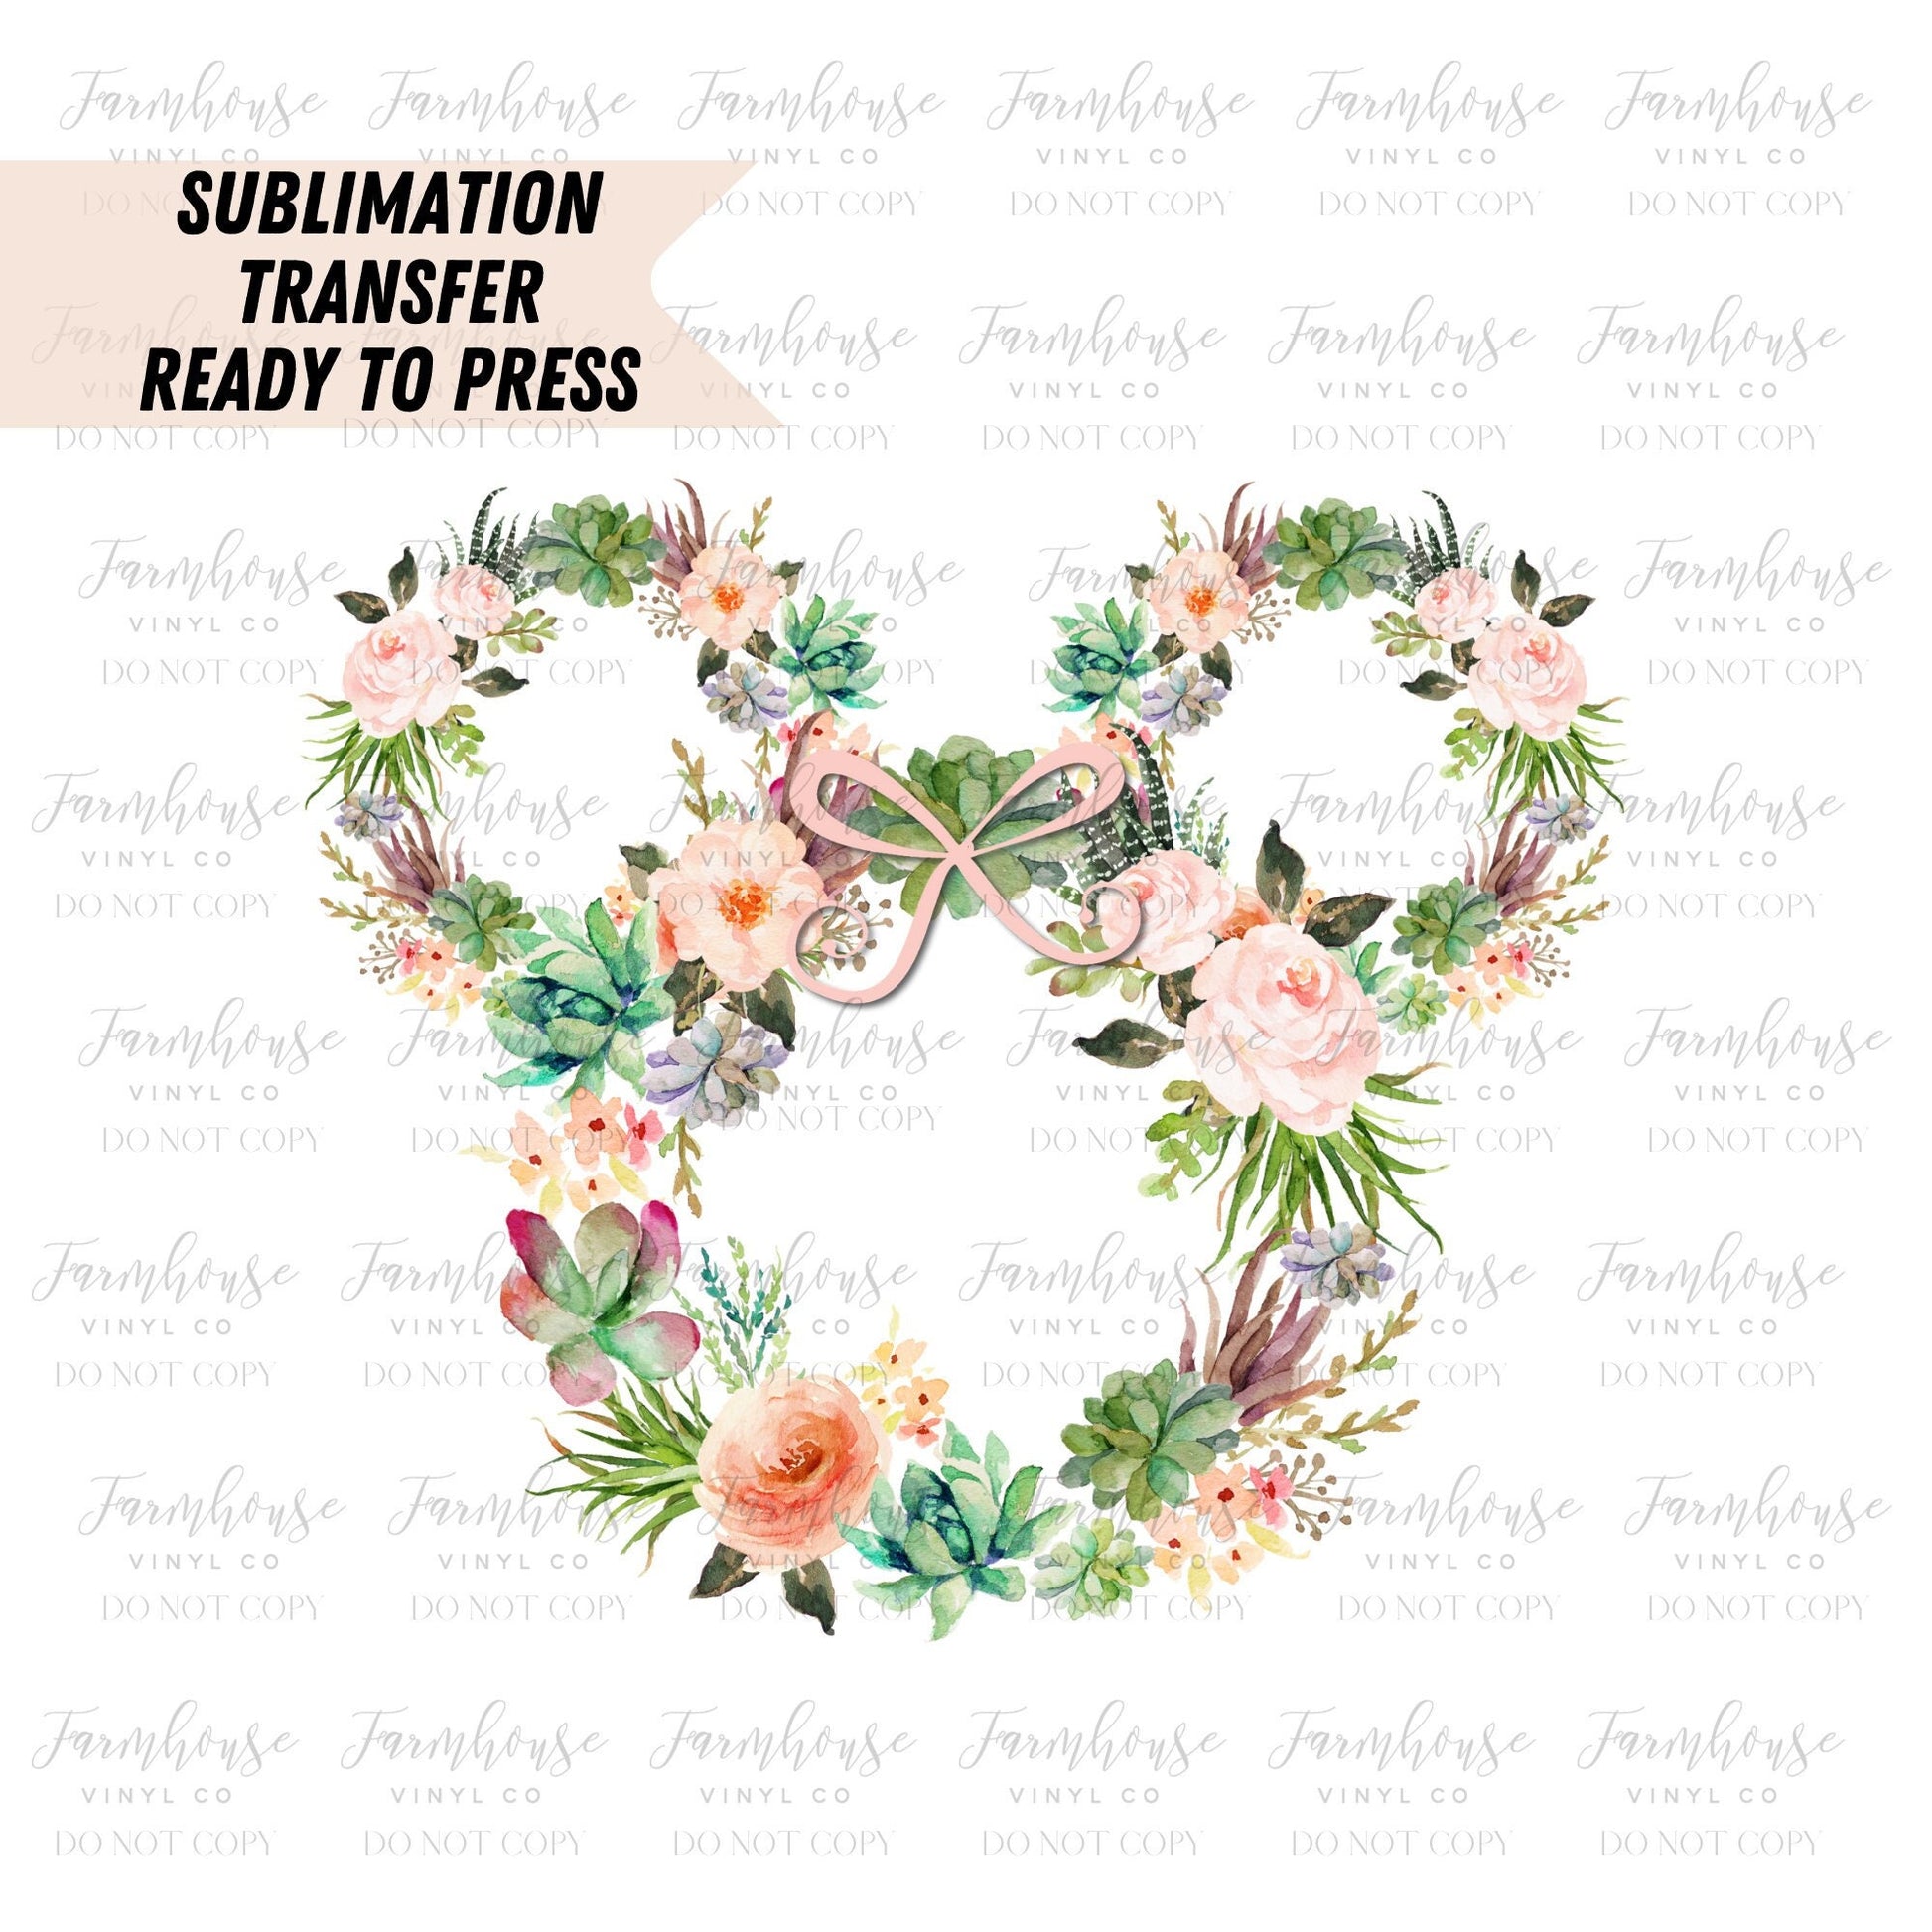 Succulent Ears Floral Ready To Press, Sublimation Transfers, Magical Vacation Design, Sublimation, Transfer Ready To Press, Heat Transfer - Farmhouse Vinyl Co